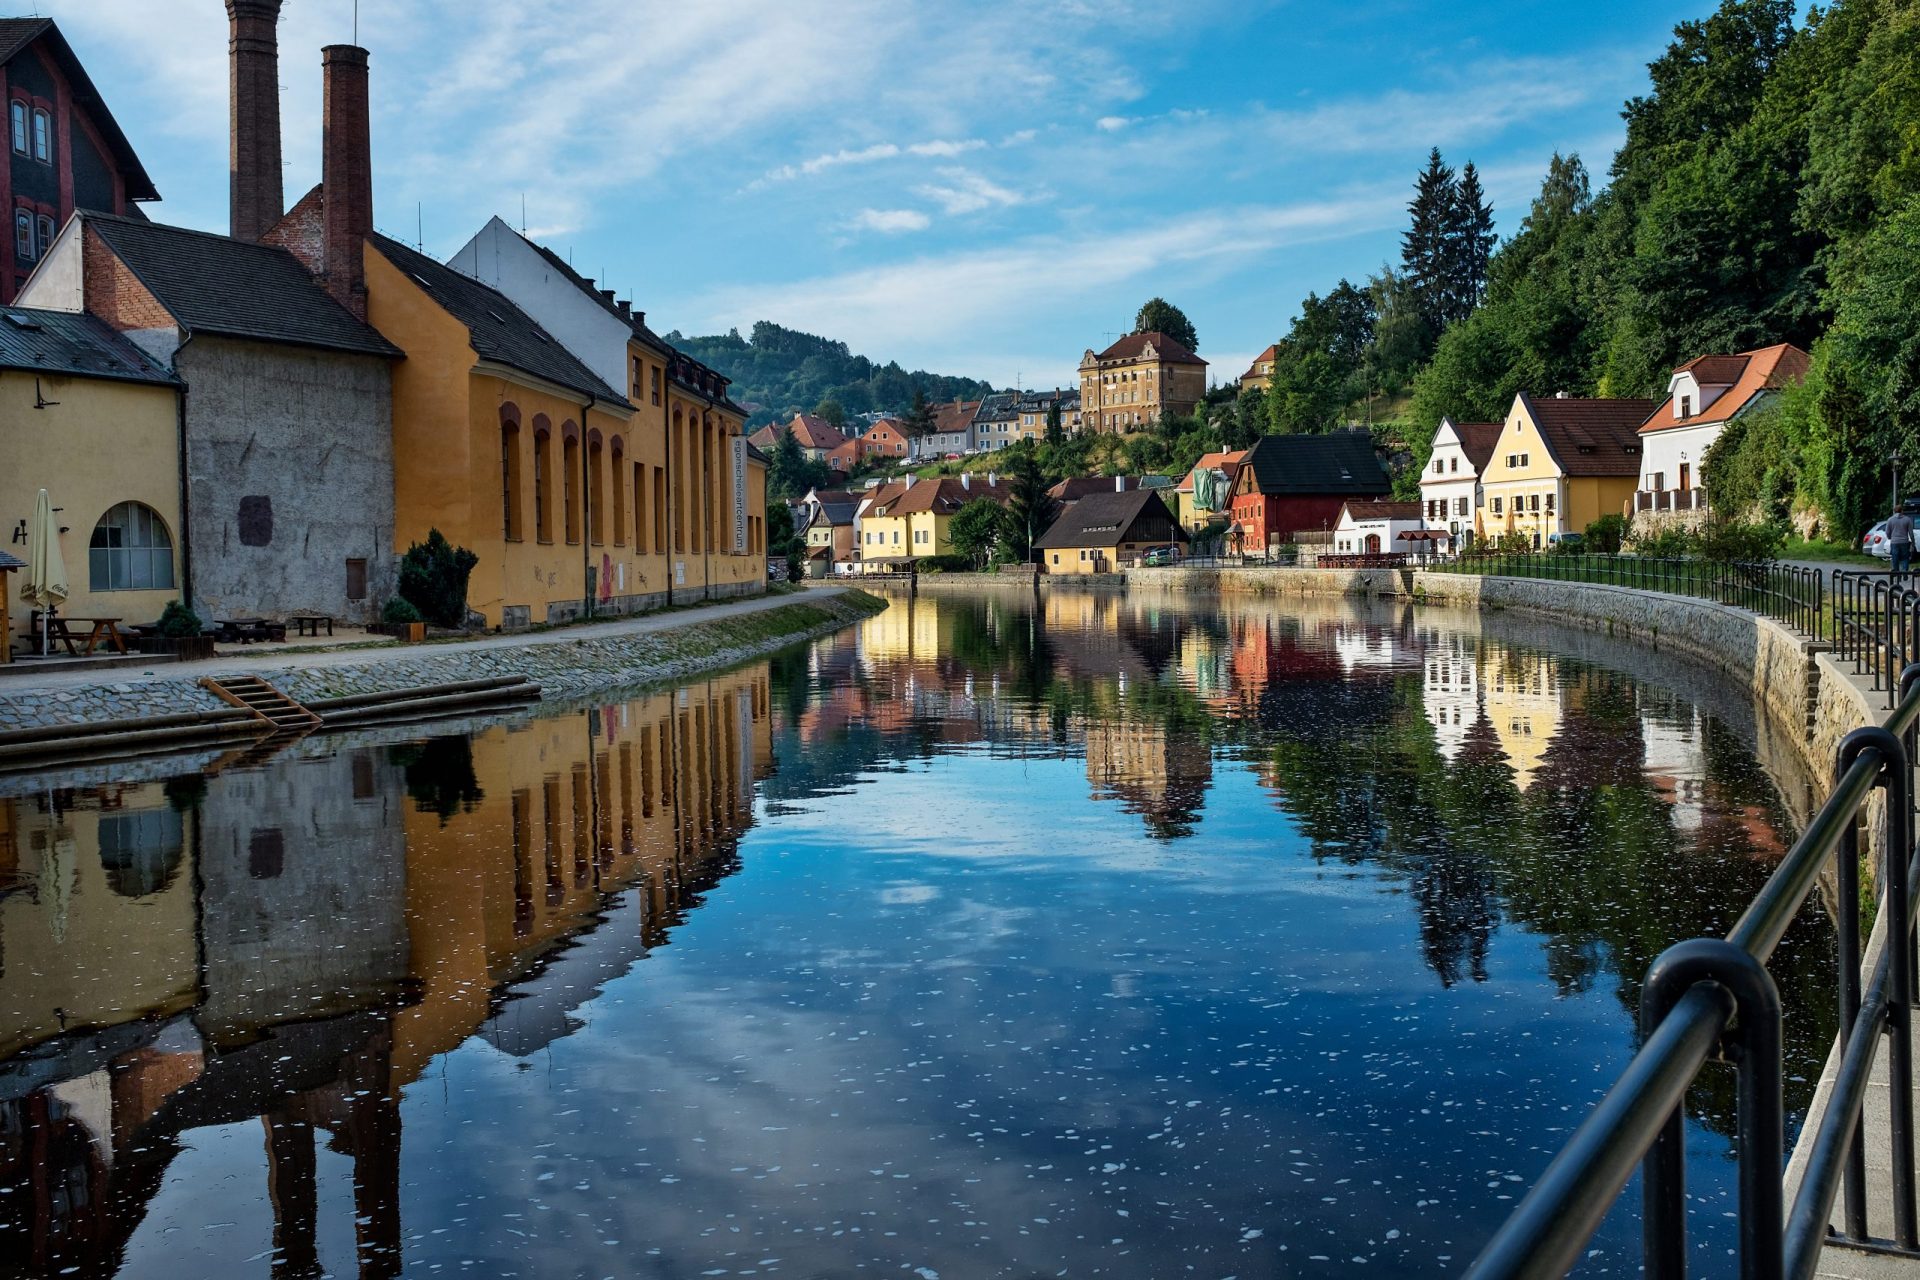 <p>Rafting or canoeing on the Vltava River is a great way to experience the town of Český Krumlov. You will have another point of view on its buildings with Gothic architecture and you also can enjoy the natural beauty of its surroundings.</p> <p>The average price of a night in an Airbnb in Český Krumlov (according to Time Out) is €86 ($93).</p>